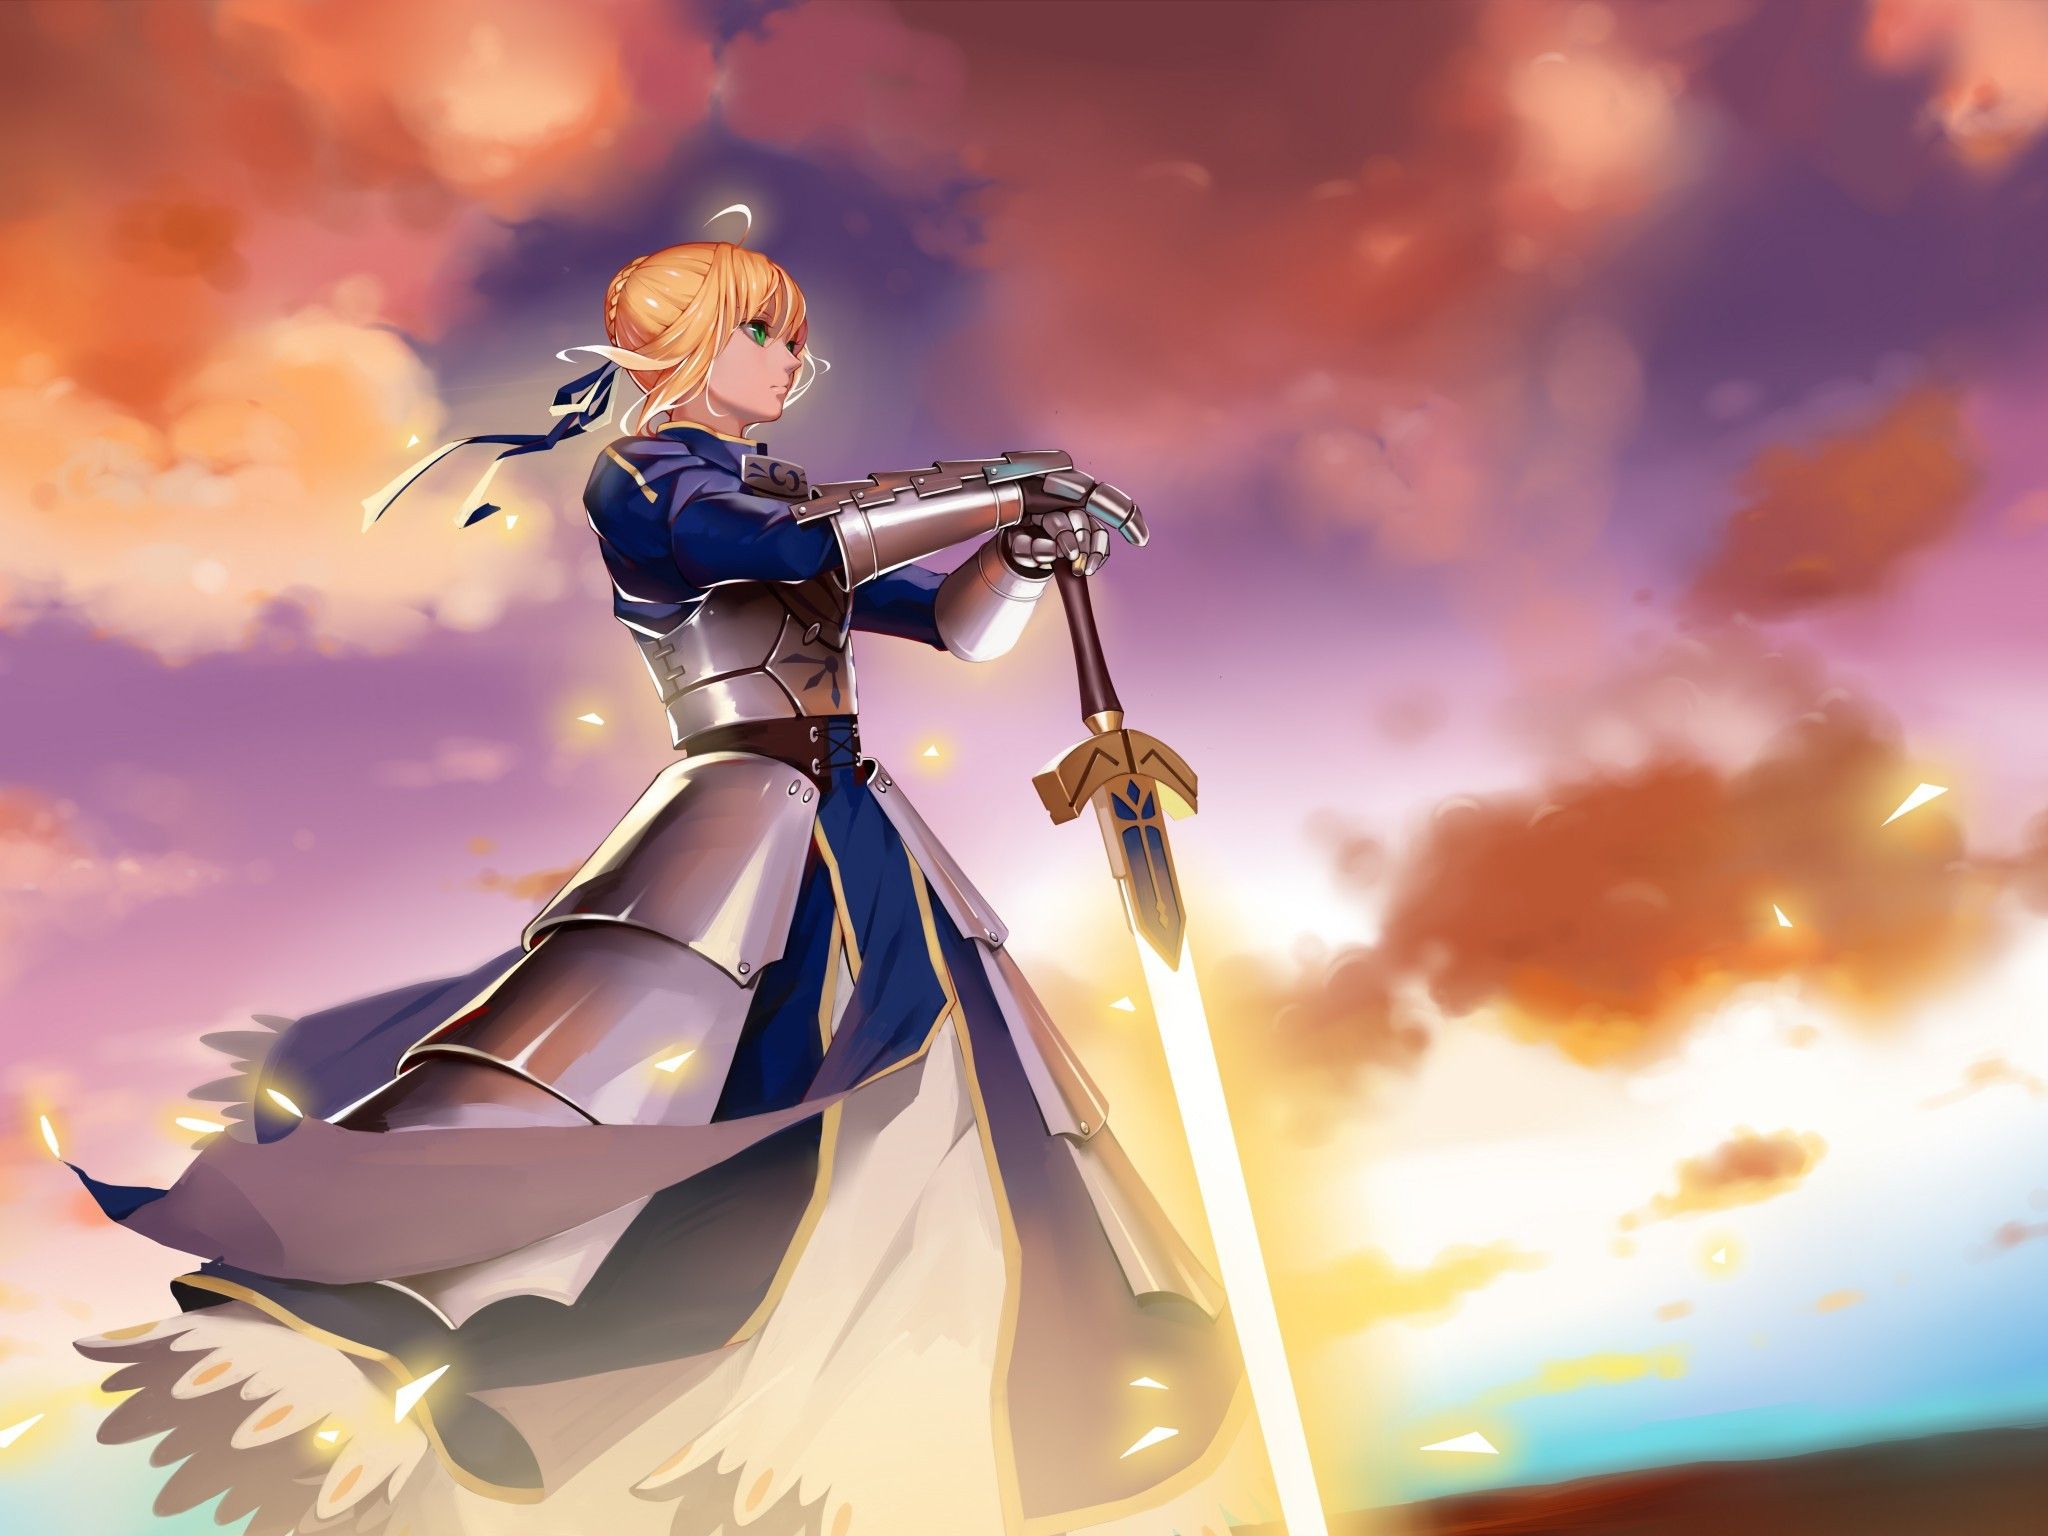 Download Fate Stay Night Saber Fate Series Data Src Fate Saber Wallpaper 4k Hd Wallpaper Backgrounds Download